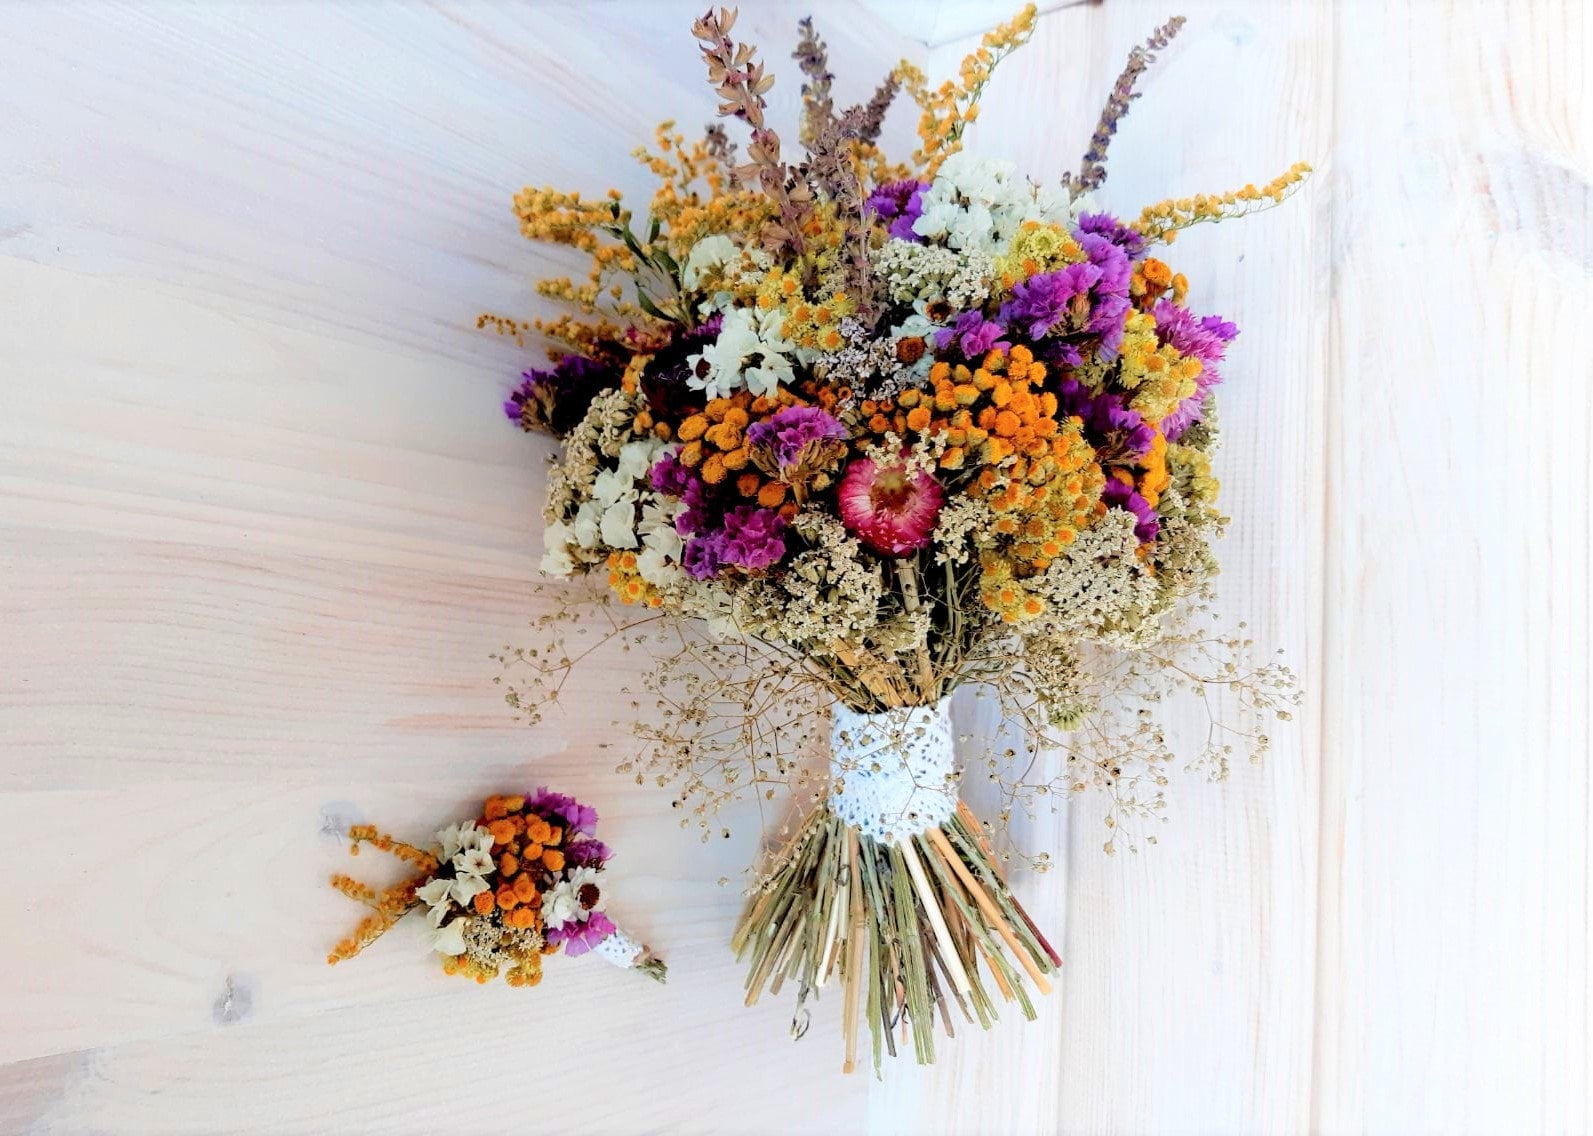 A Bouquet Of Dried Wildflowers In The Hands Of The Bride Close Up